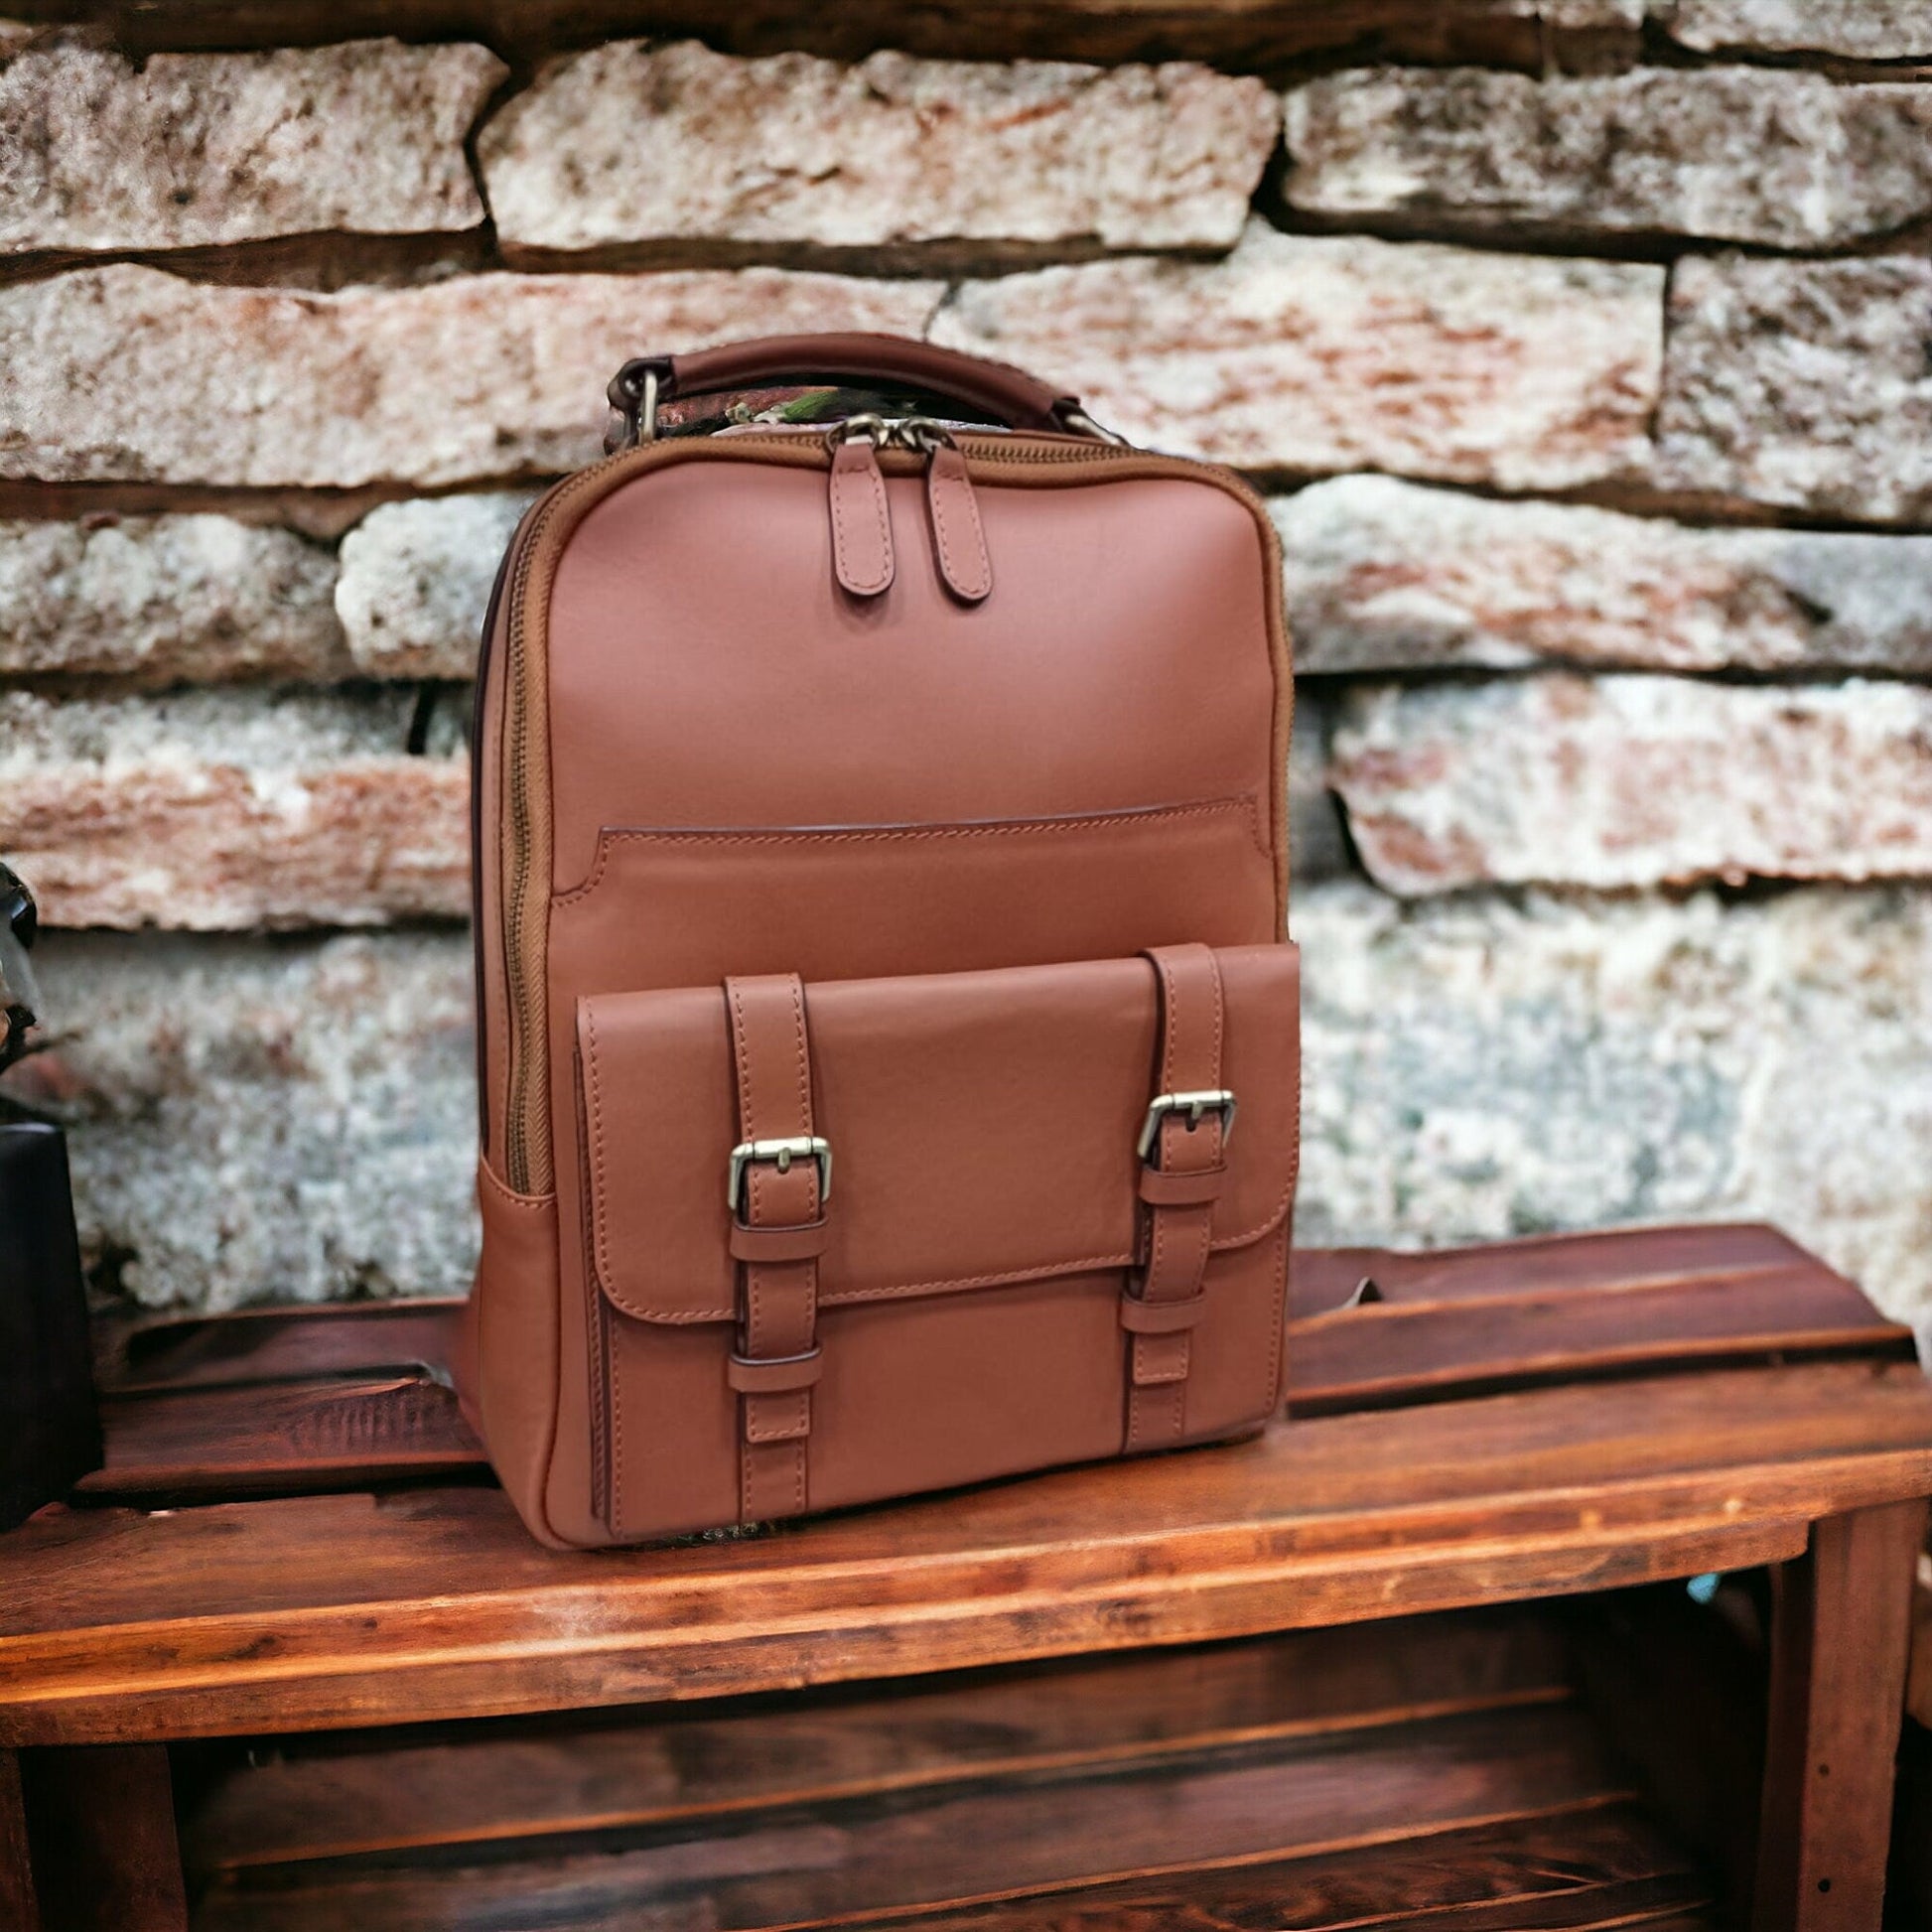 Brown,Tan,Black, Blue color | Full Leather Handmade Daypack | 20L - 30 L options  |  Laptop pocket premimum leather, Citypack, Daily use  99percenthandmade 20 Tan 